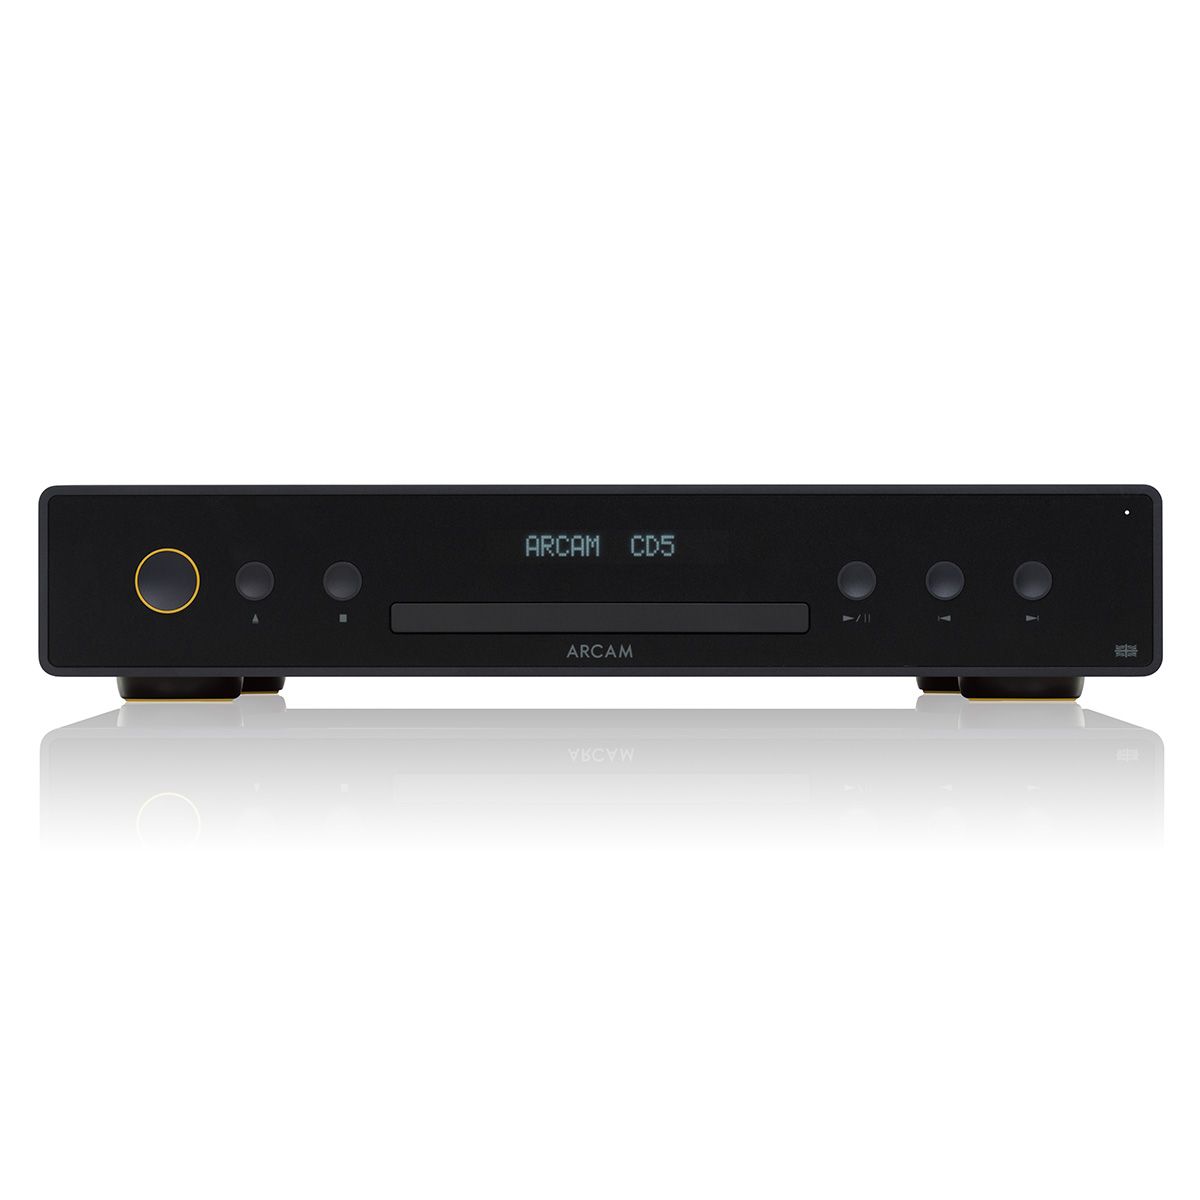 Arcam CD5 Compact Disc Player front view